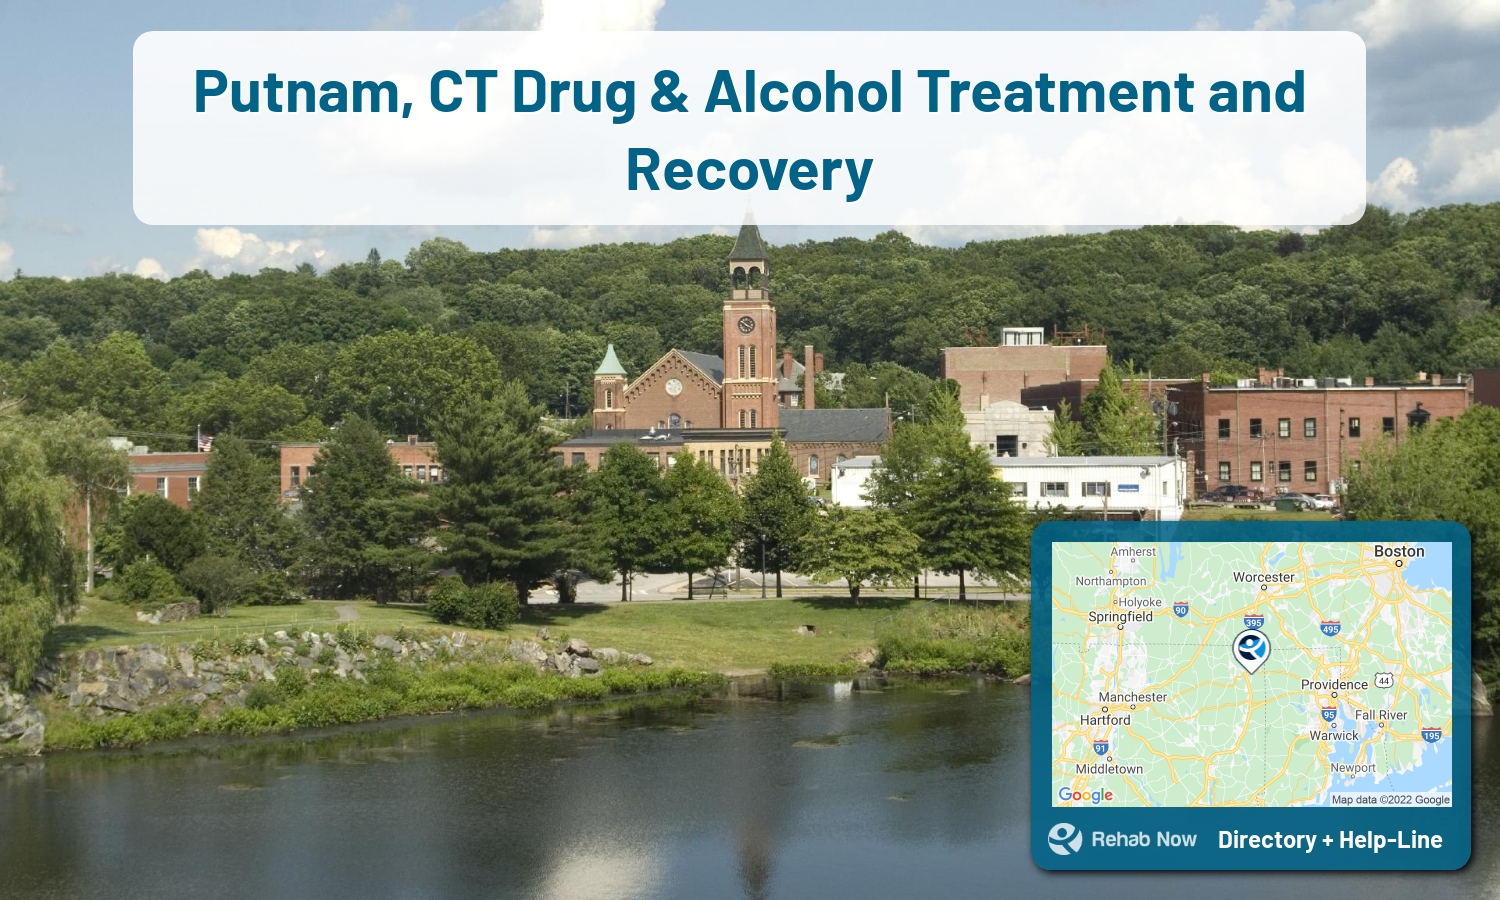 List of alcohol and drug treatment centers near you in Putnam, Connecticut. Research certifications, programs, methods, pricing, and more.